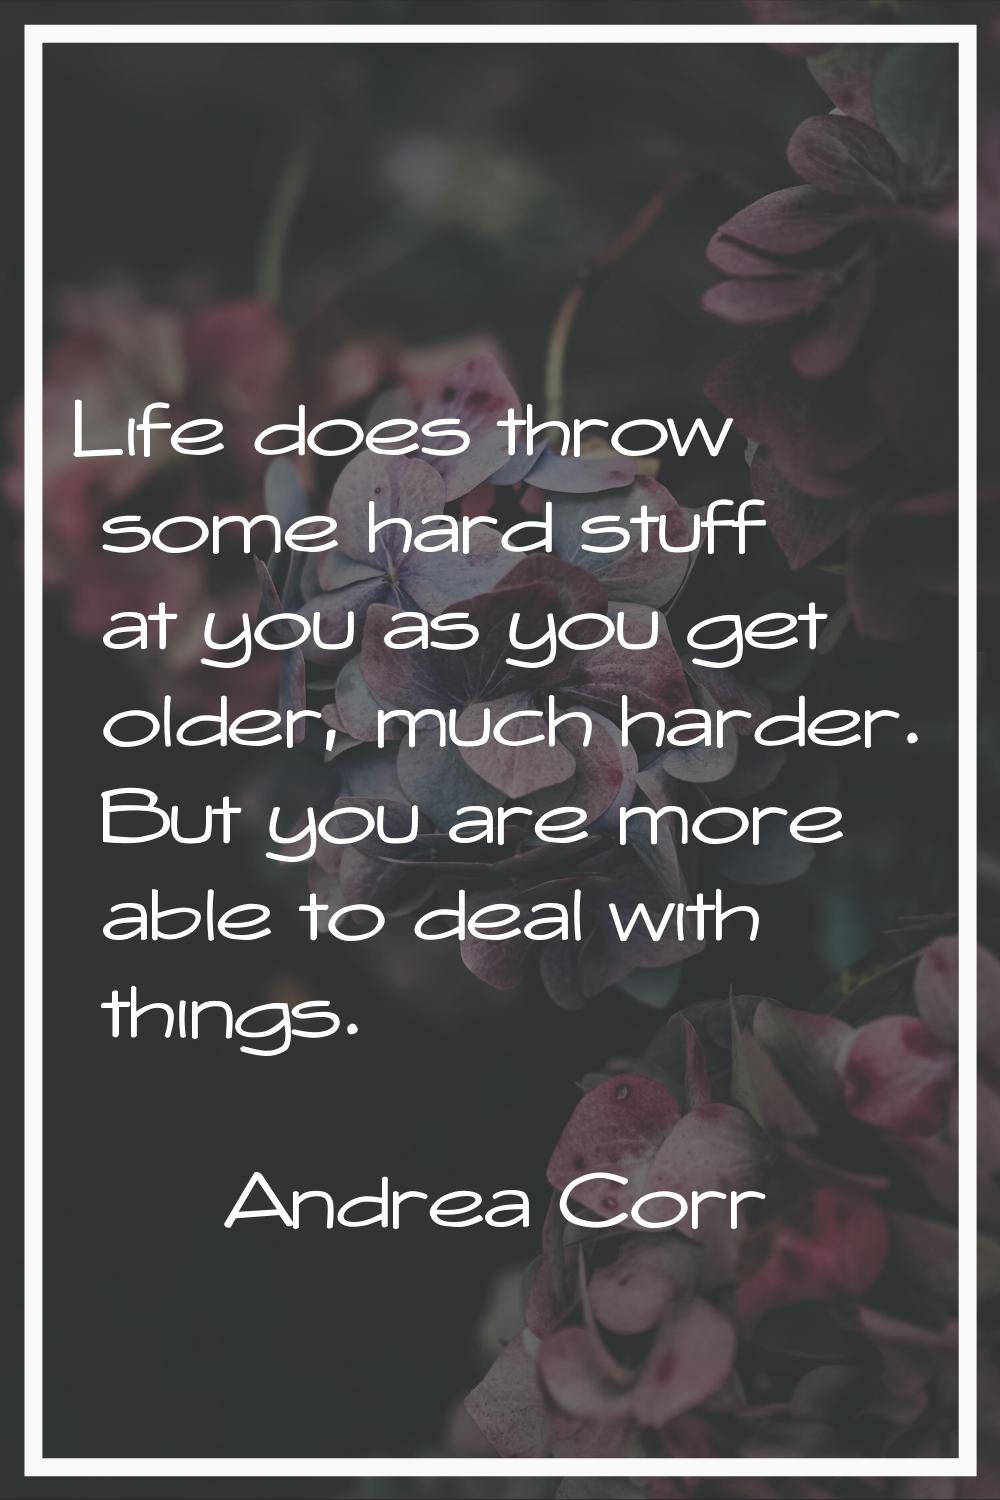 Life does throw some hard stuff at you as you get older, much harder. But you are more able to deal